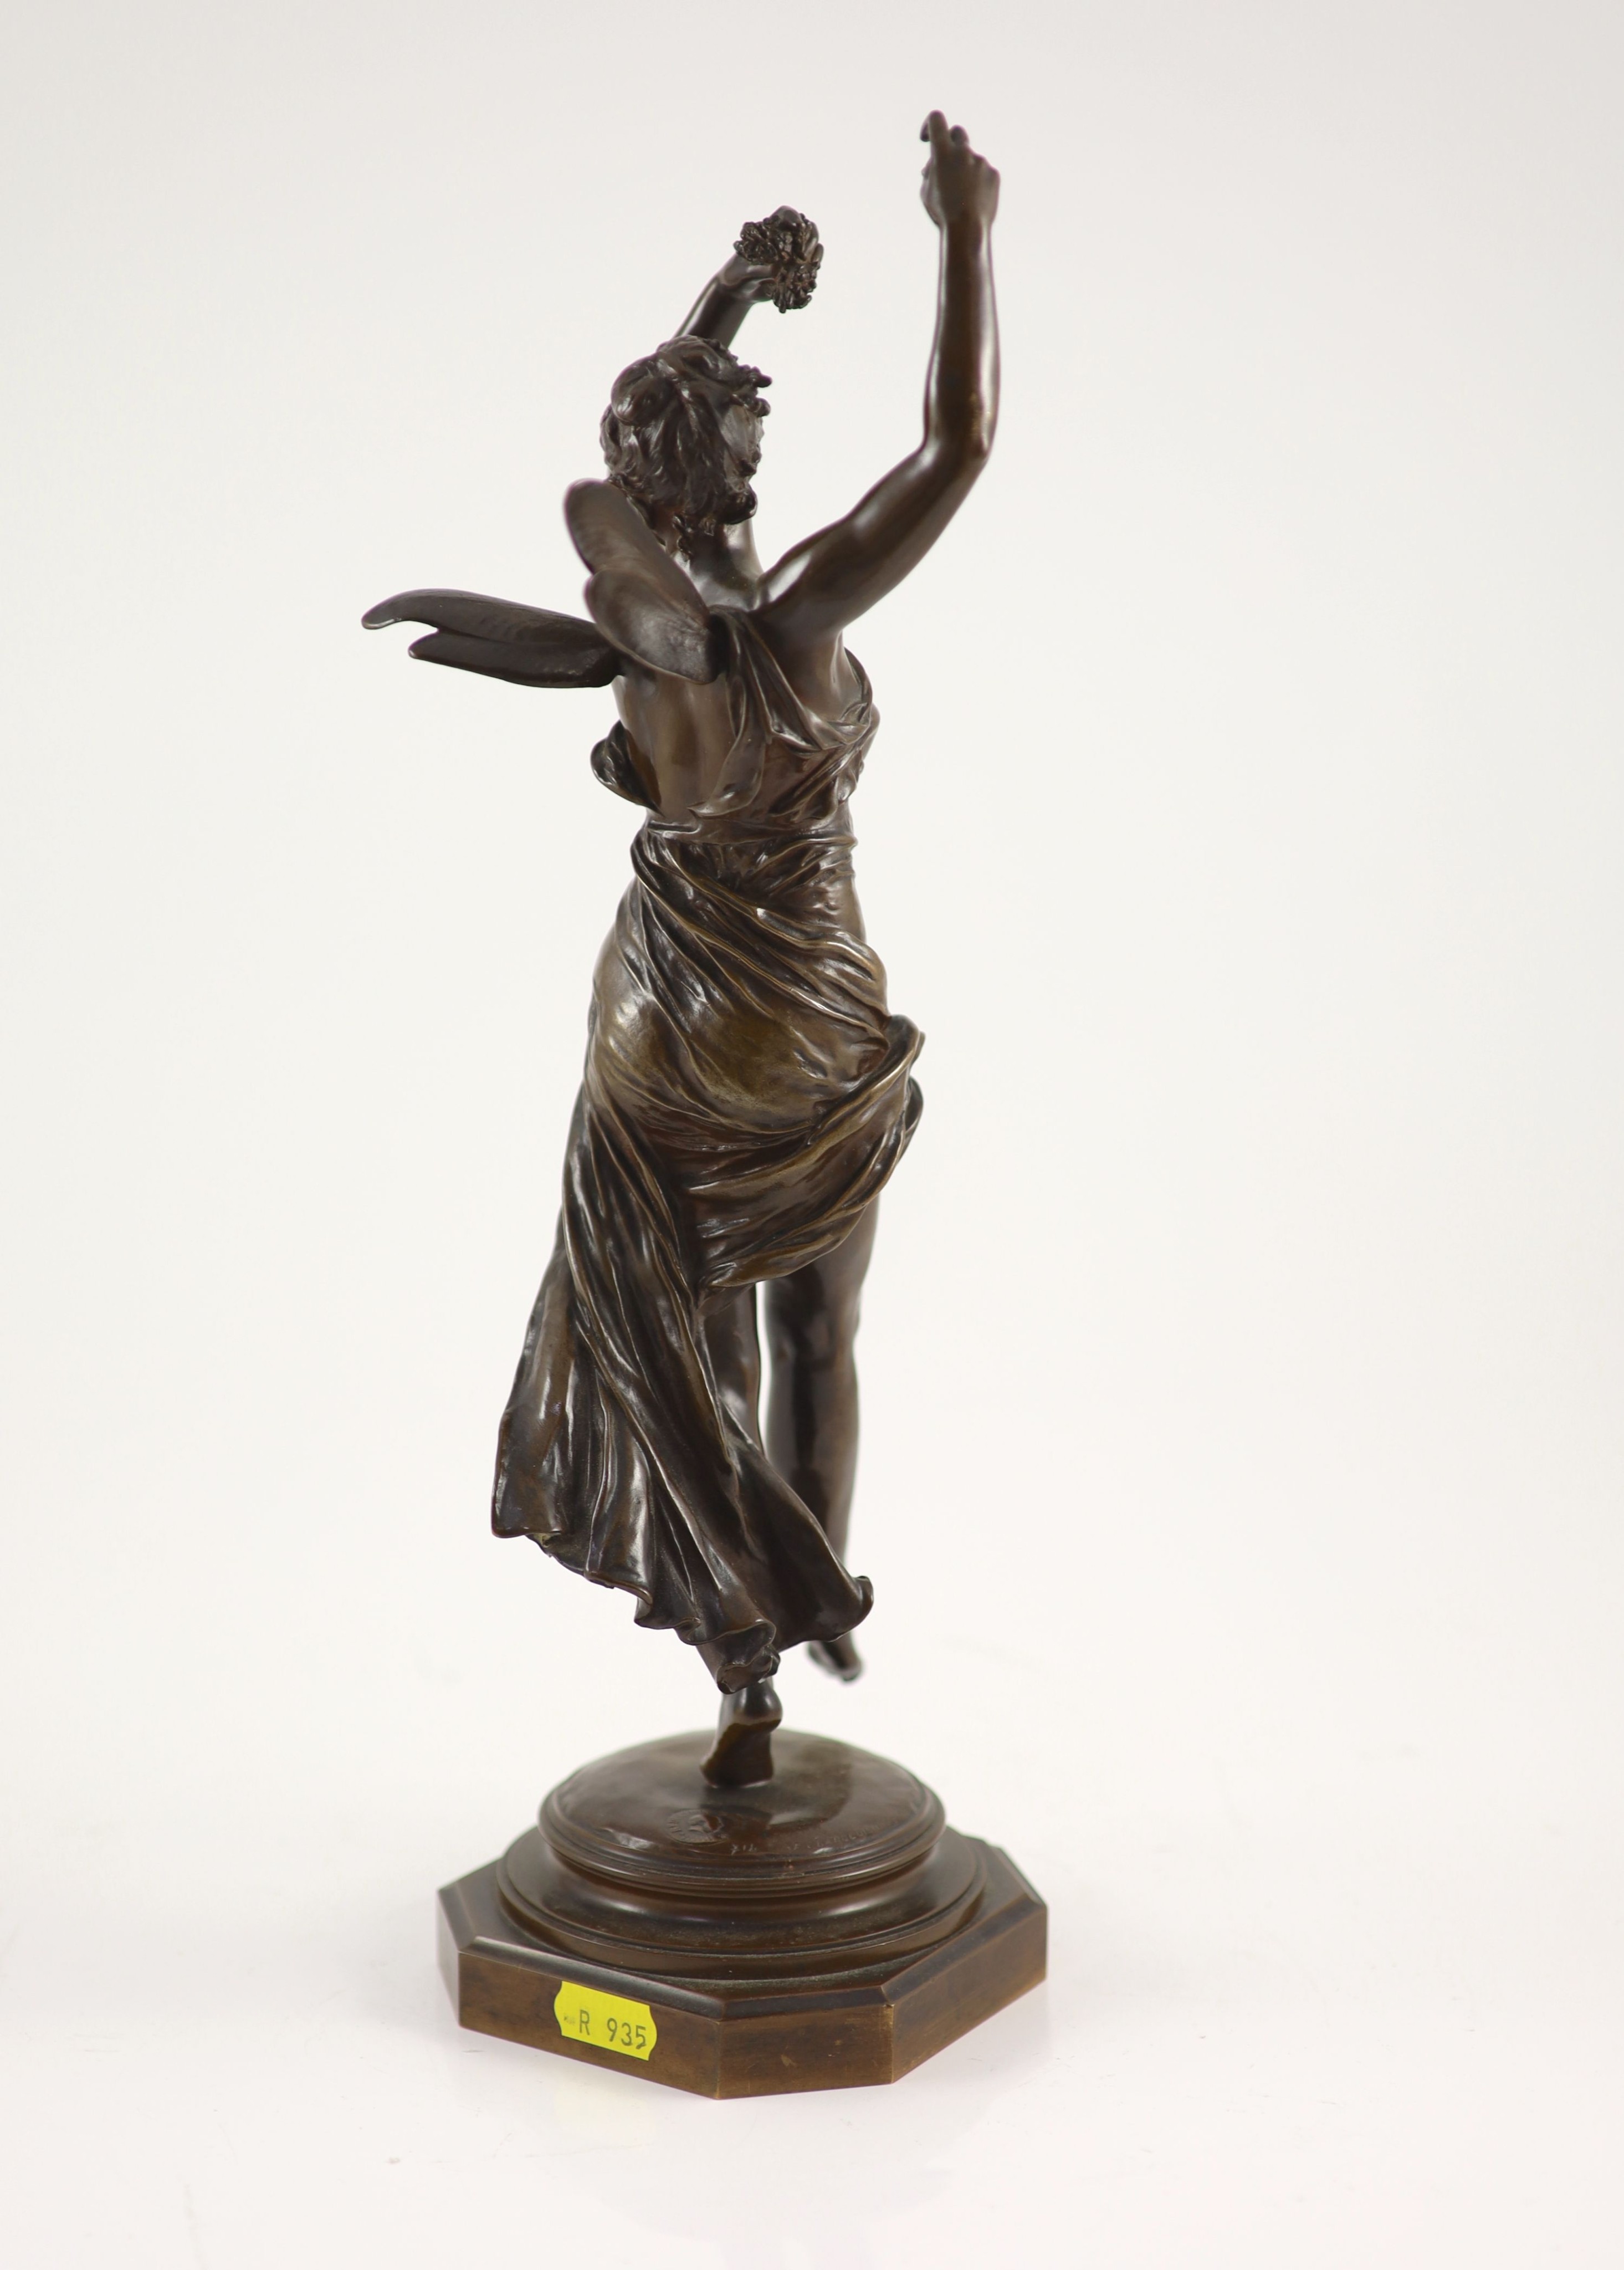 Eugene Delaplanche (French, 1836-1891), a bronze figure of the nymph 'Zephyr' H 40cm. W 12cm.